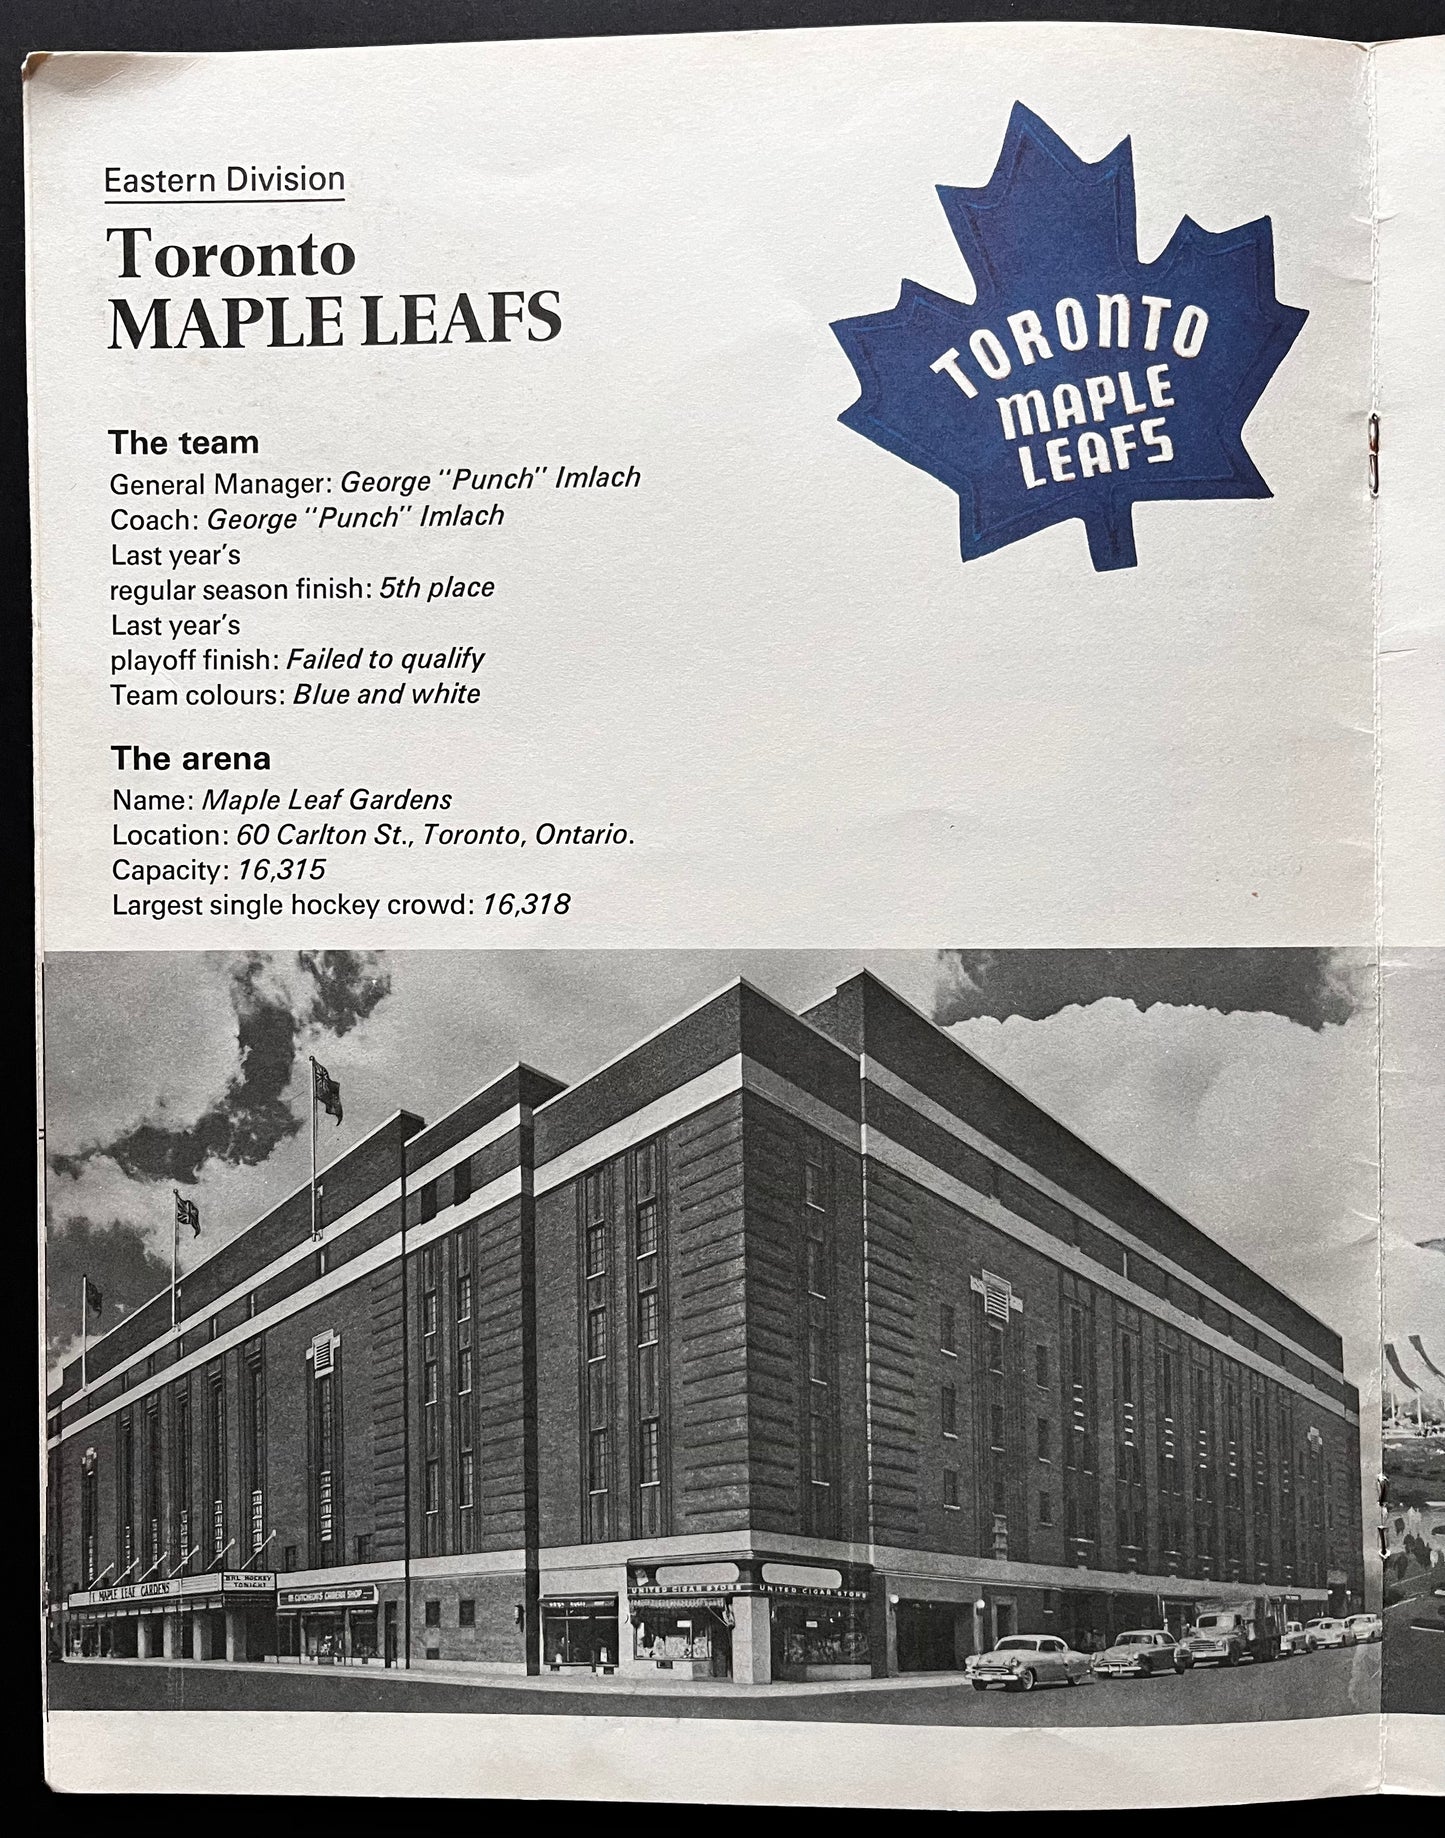 Where They Play - Rolland Paper NHL Arenas 1967-68